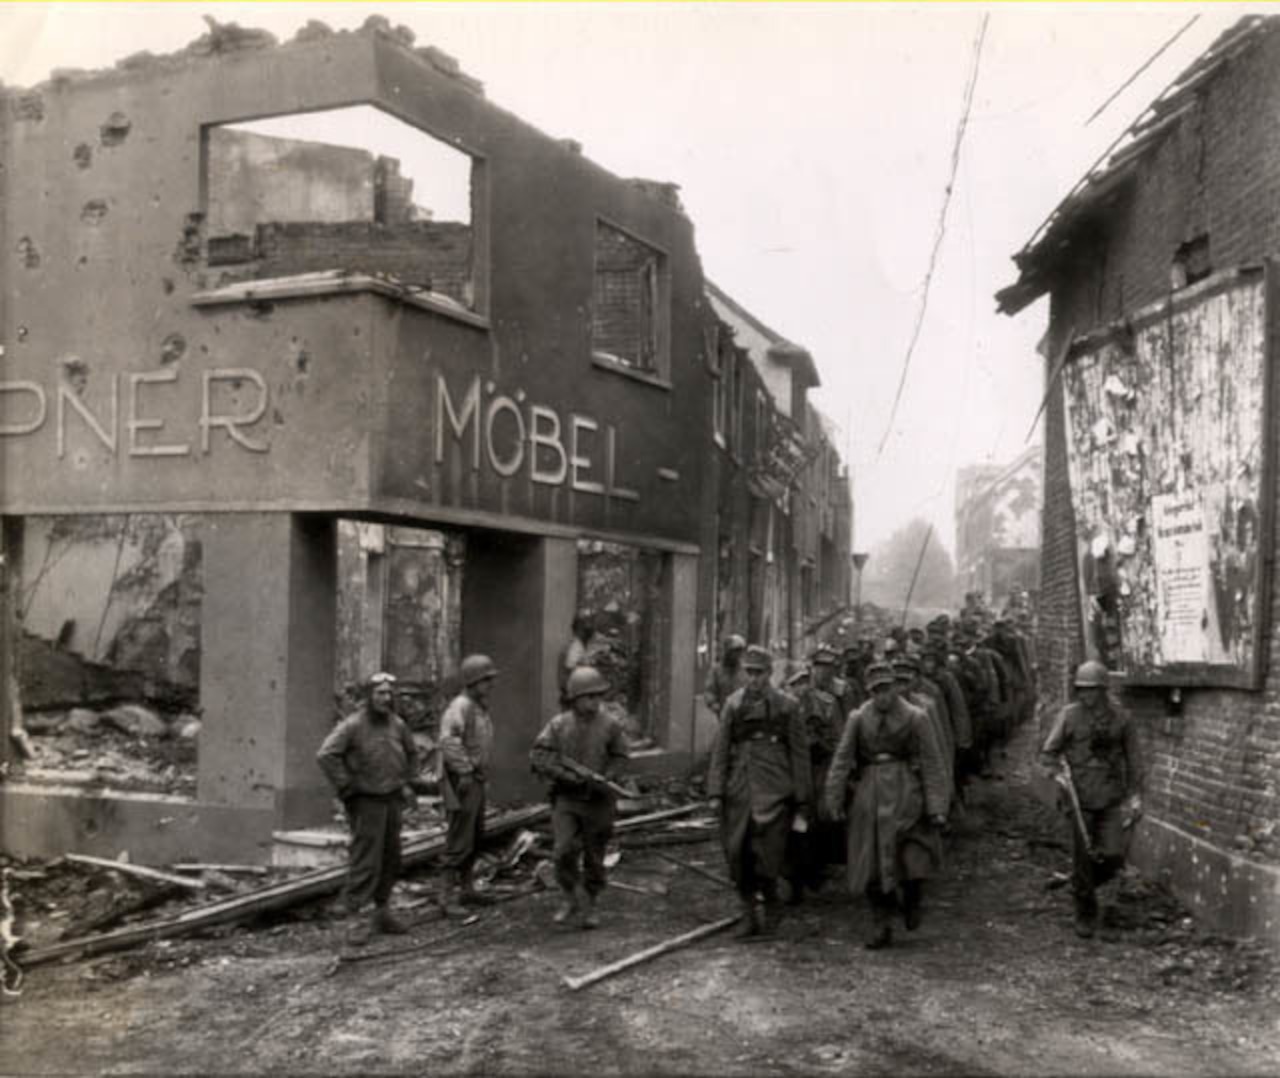 Soldiers guarded by four others march in two lines through a street lined with destroyed buildings.